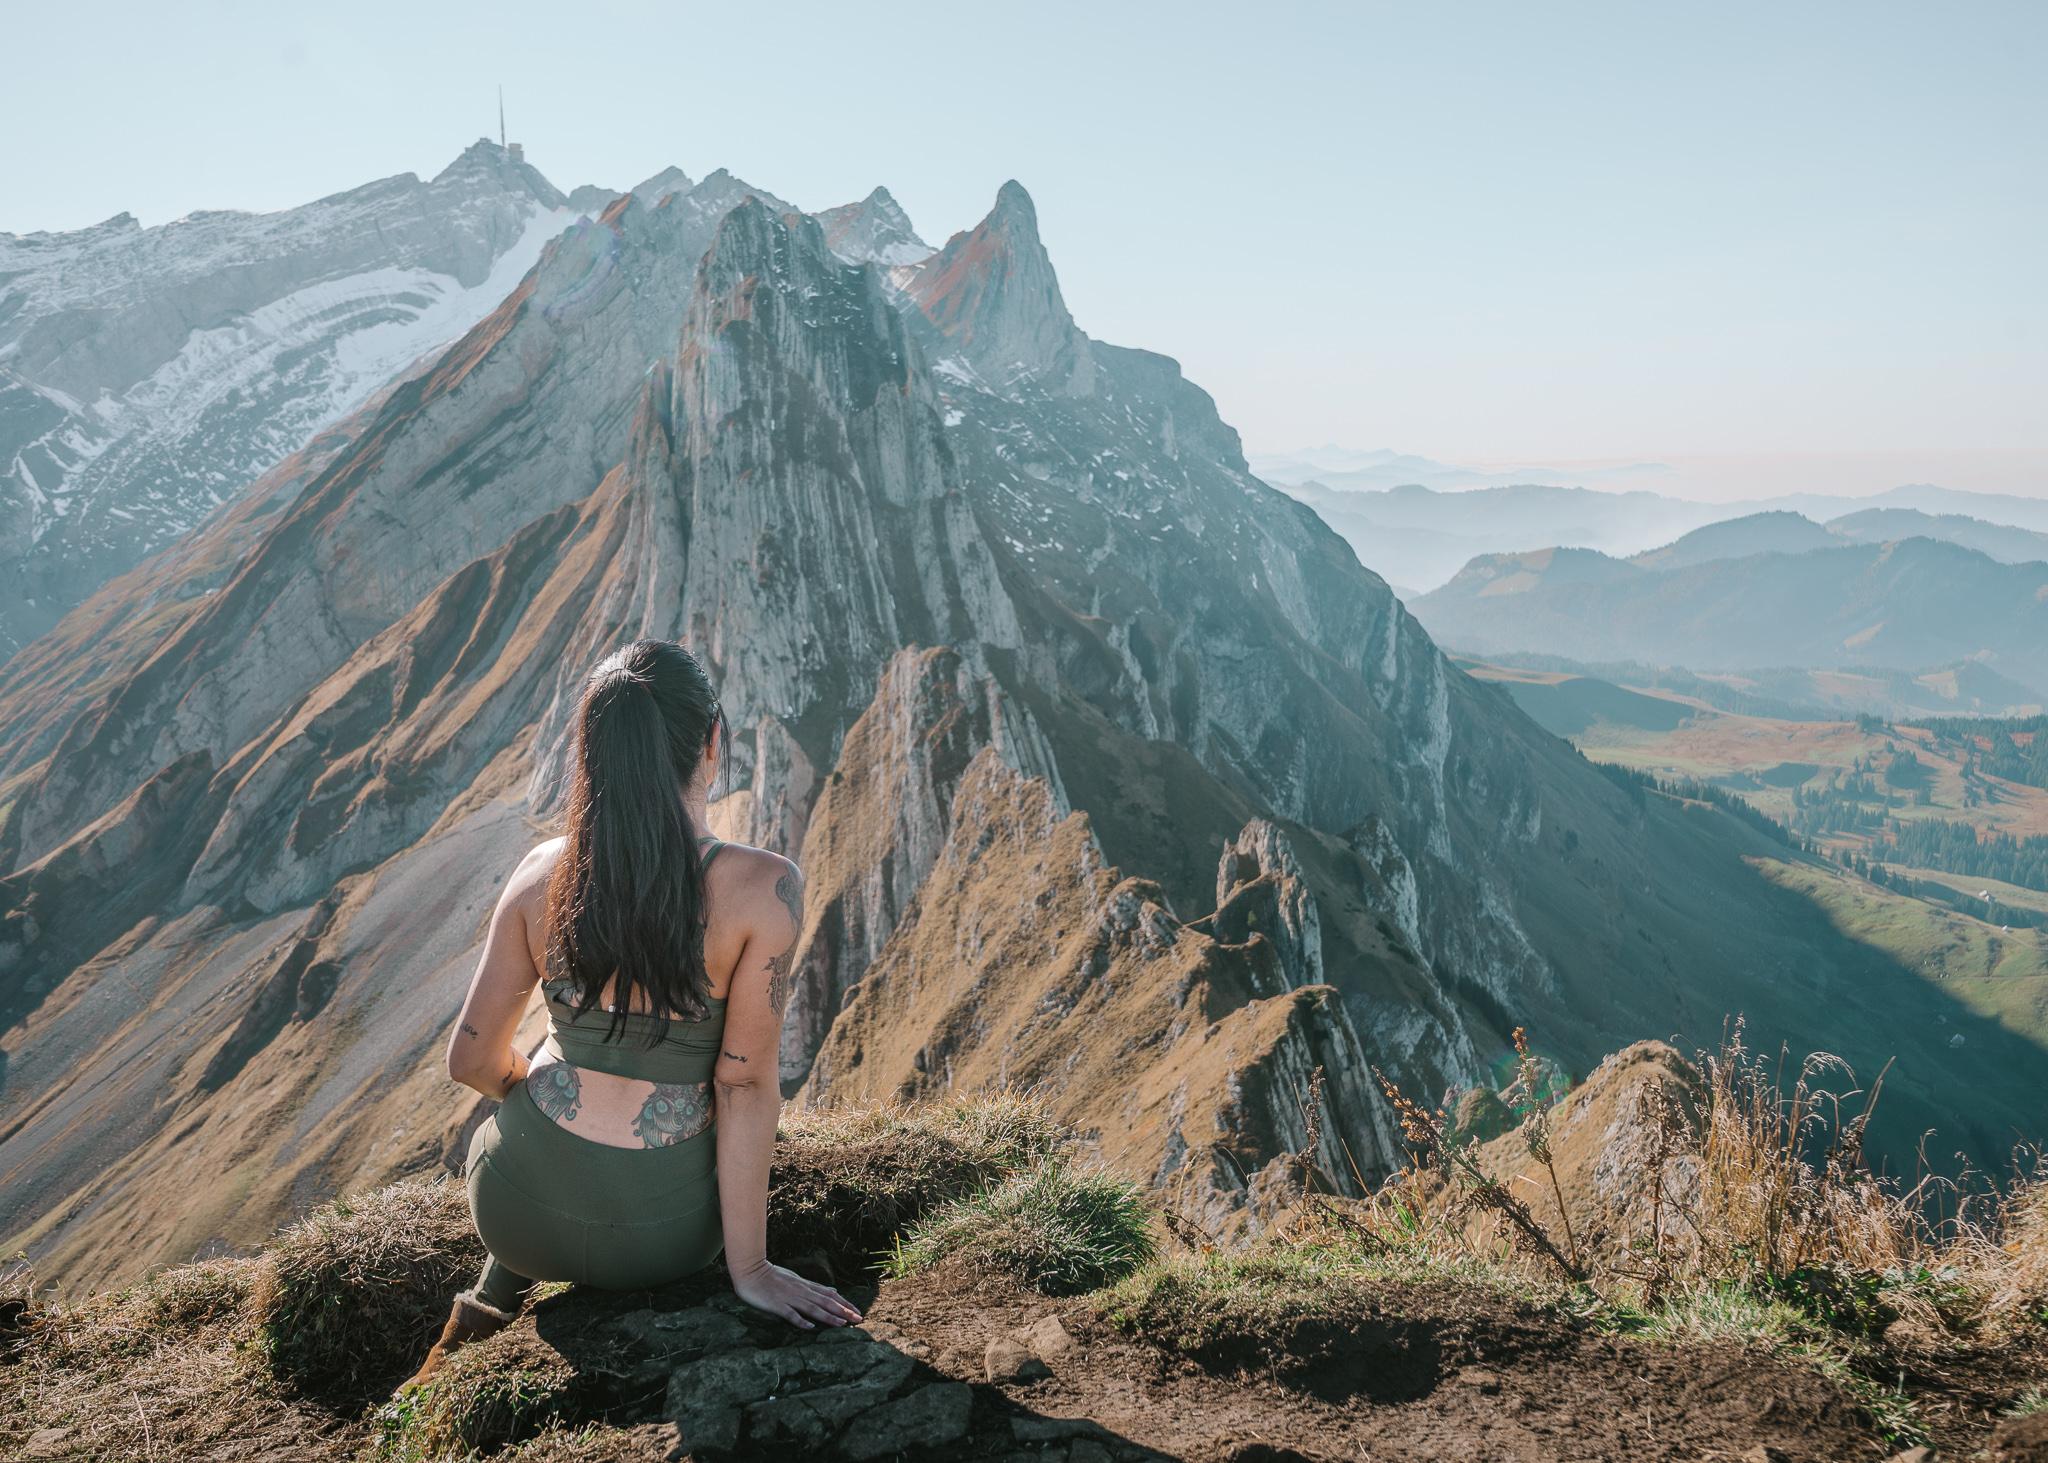 A girl sitting on the ground in front of the Shafler mountain ridge in switzerland